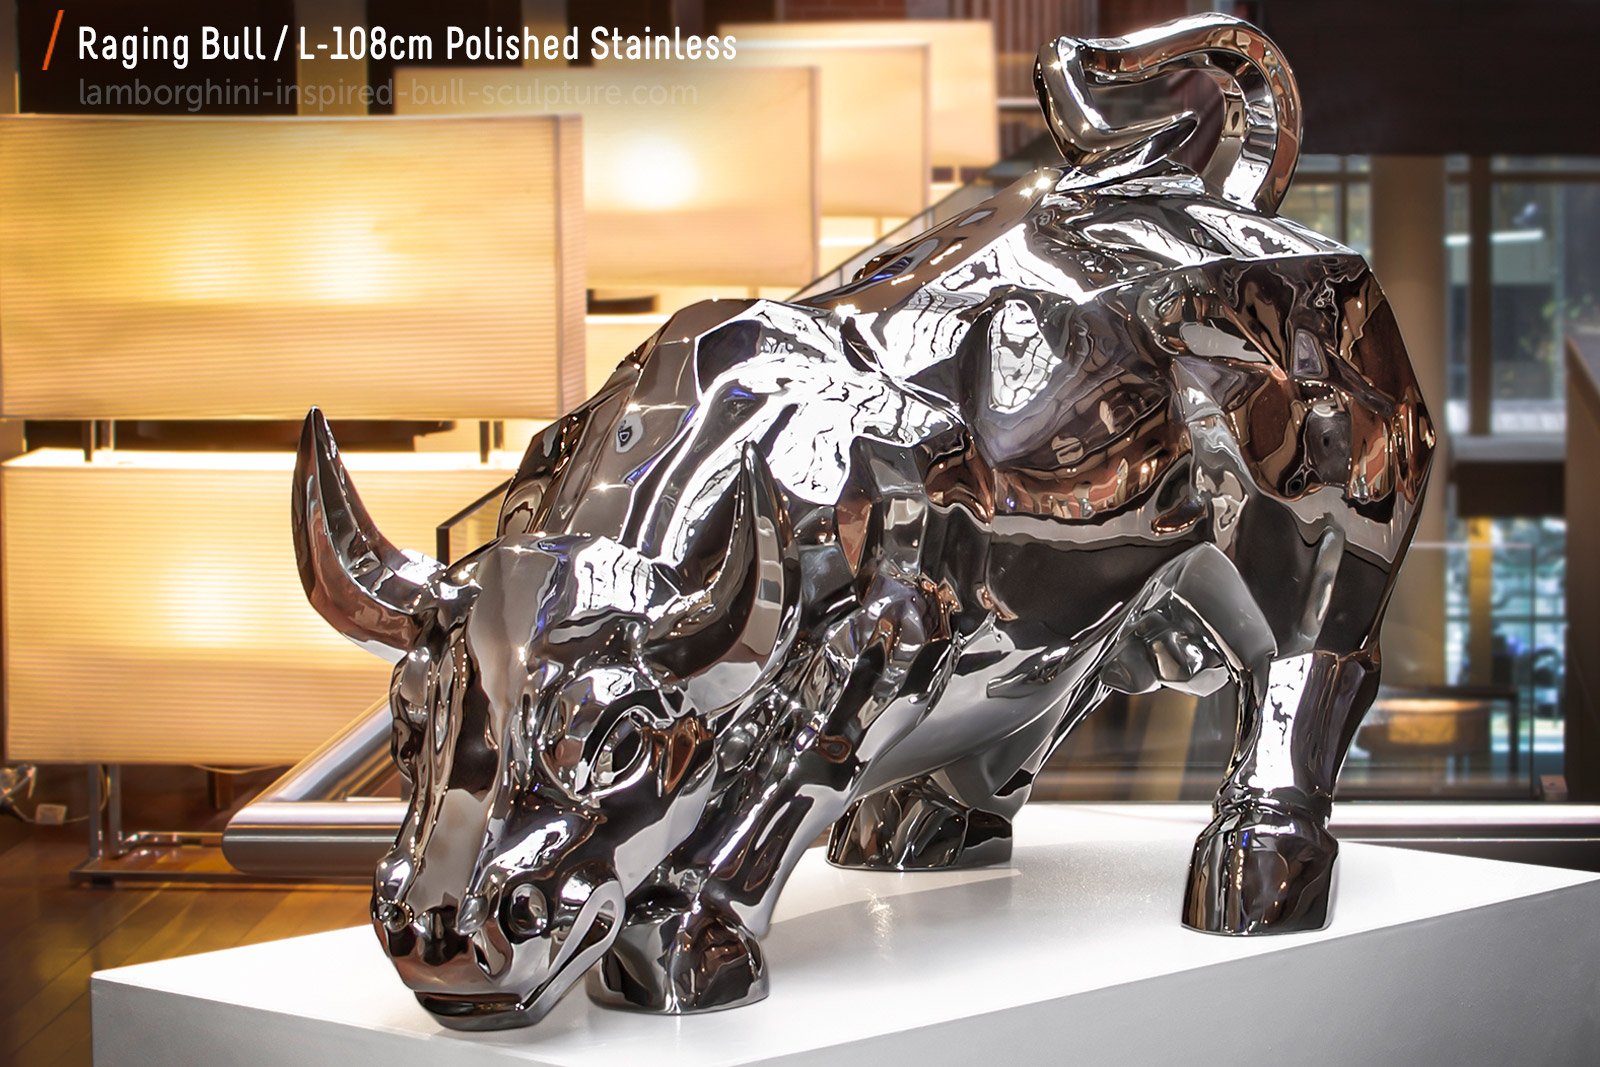 What Is A Custom Lamborghini Bull sculptures, And What Is It For?